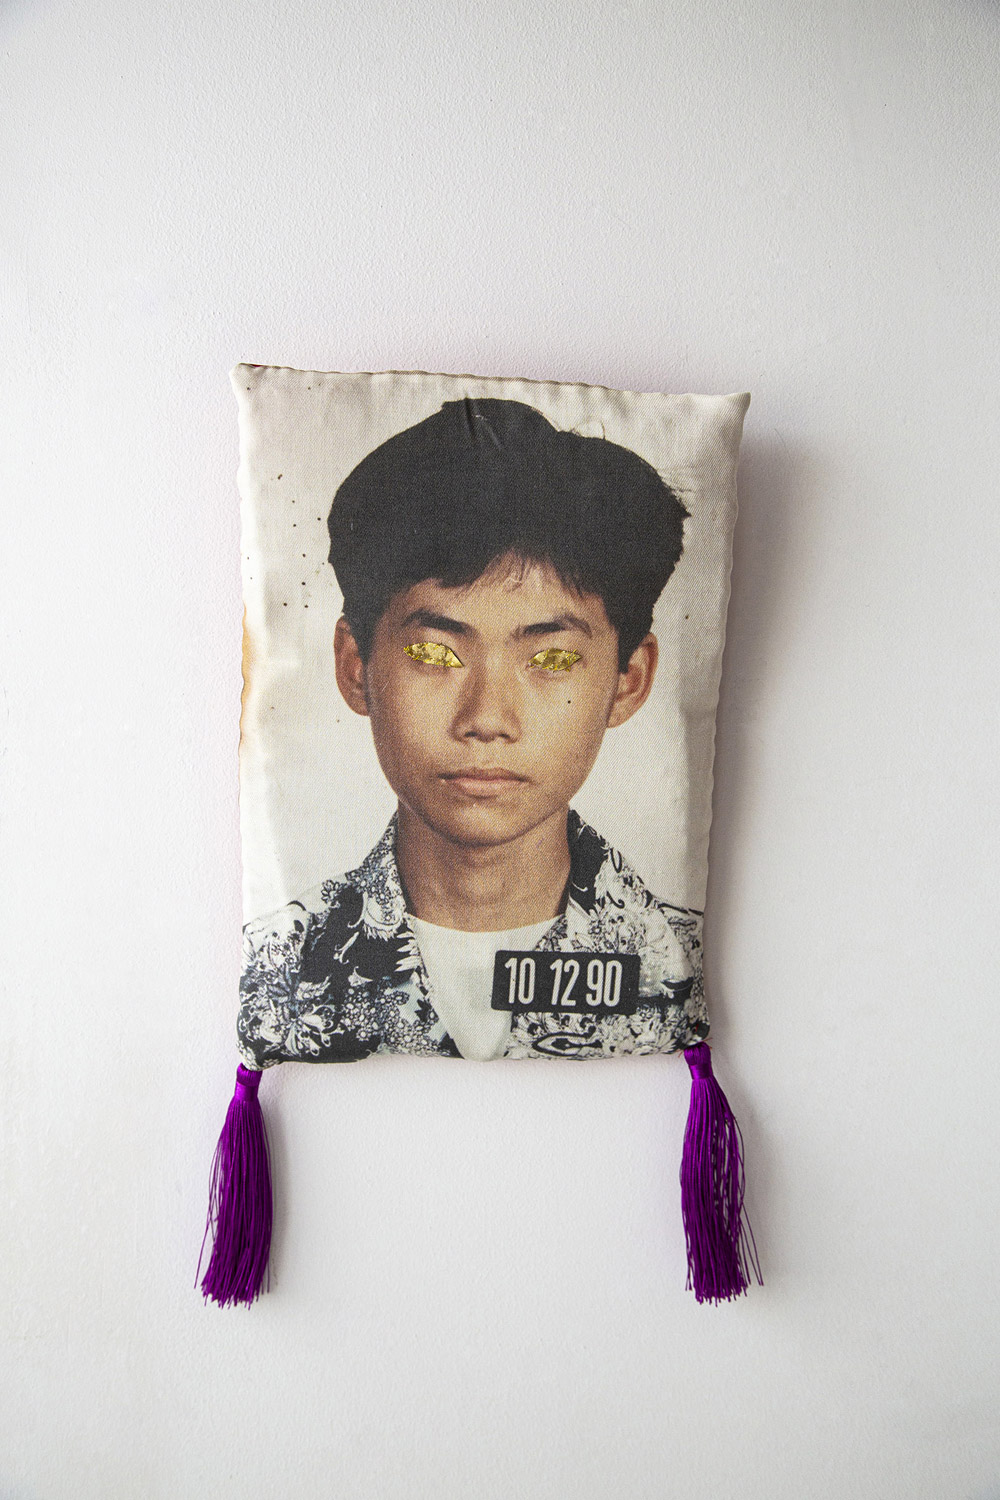 Shinji Nagabe - 10 12 90 - "When at the age of 14, I worked in a factory in Japan¨ Photograph printed on fabric, hand-sewn and filled with acrylic fibers. 40 x 22 x 3 cm - 2023